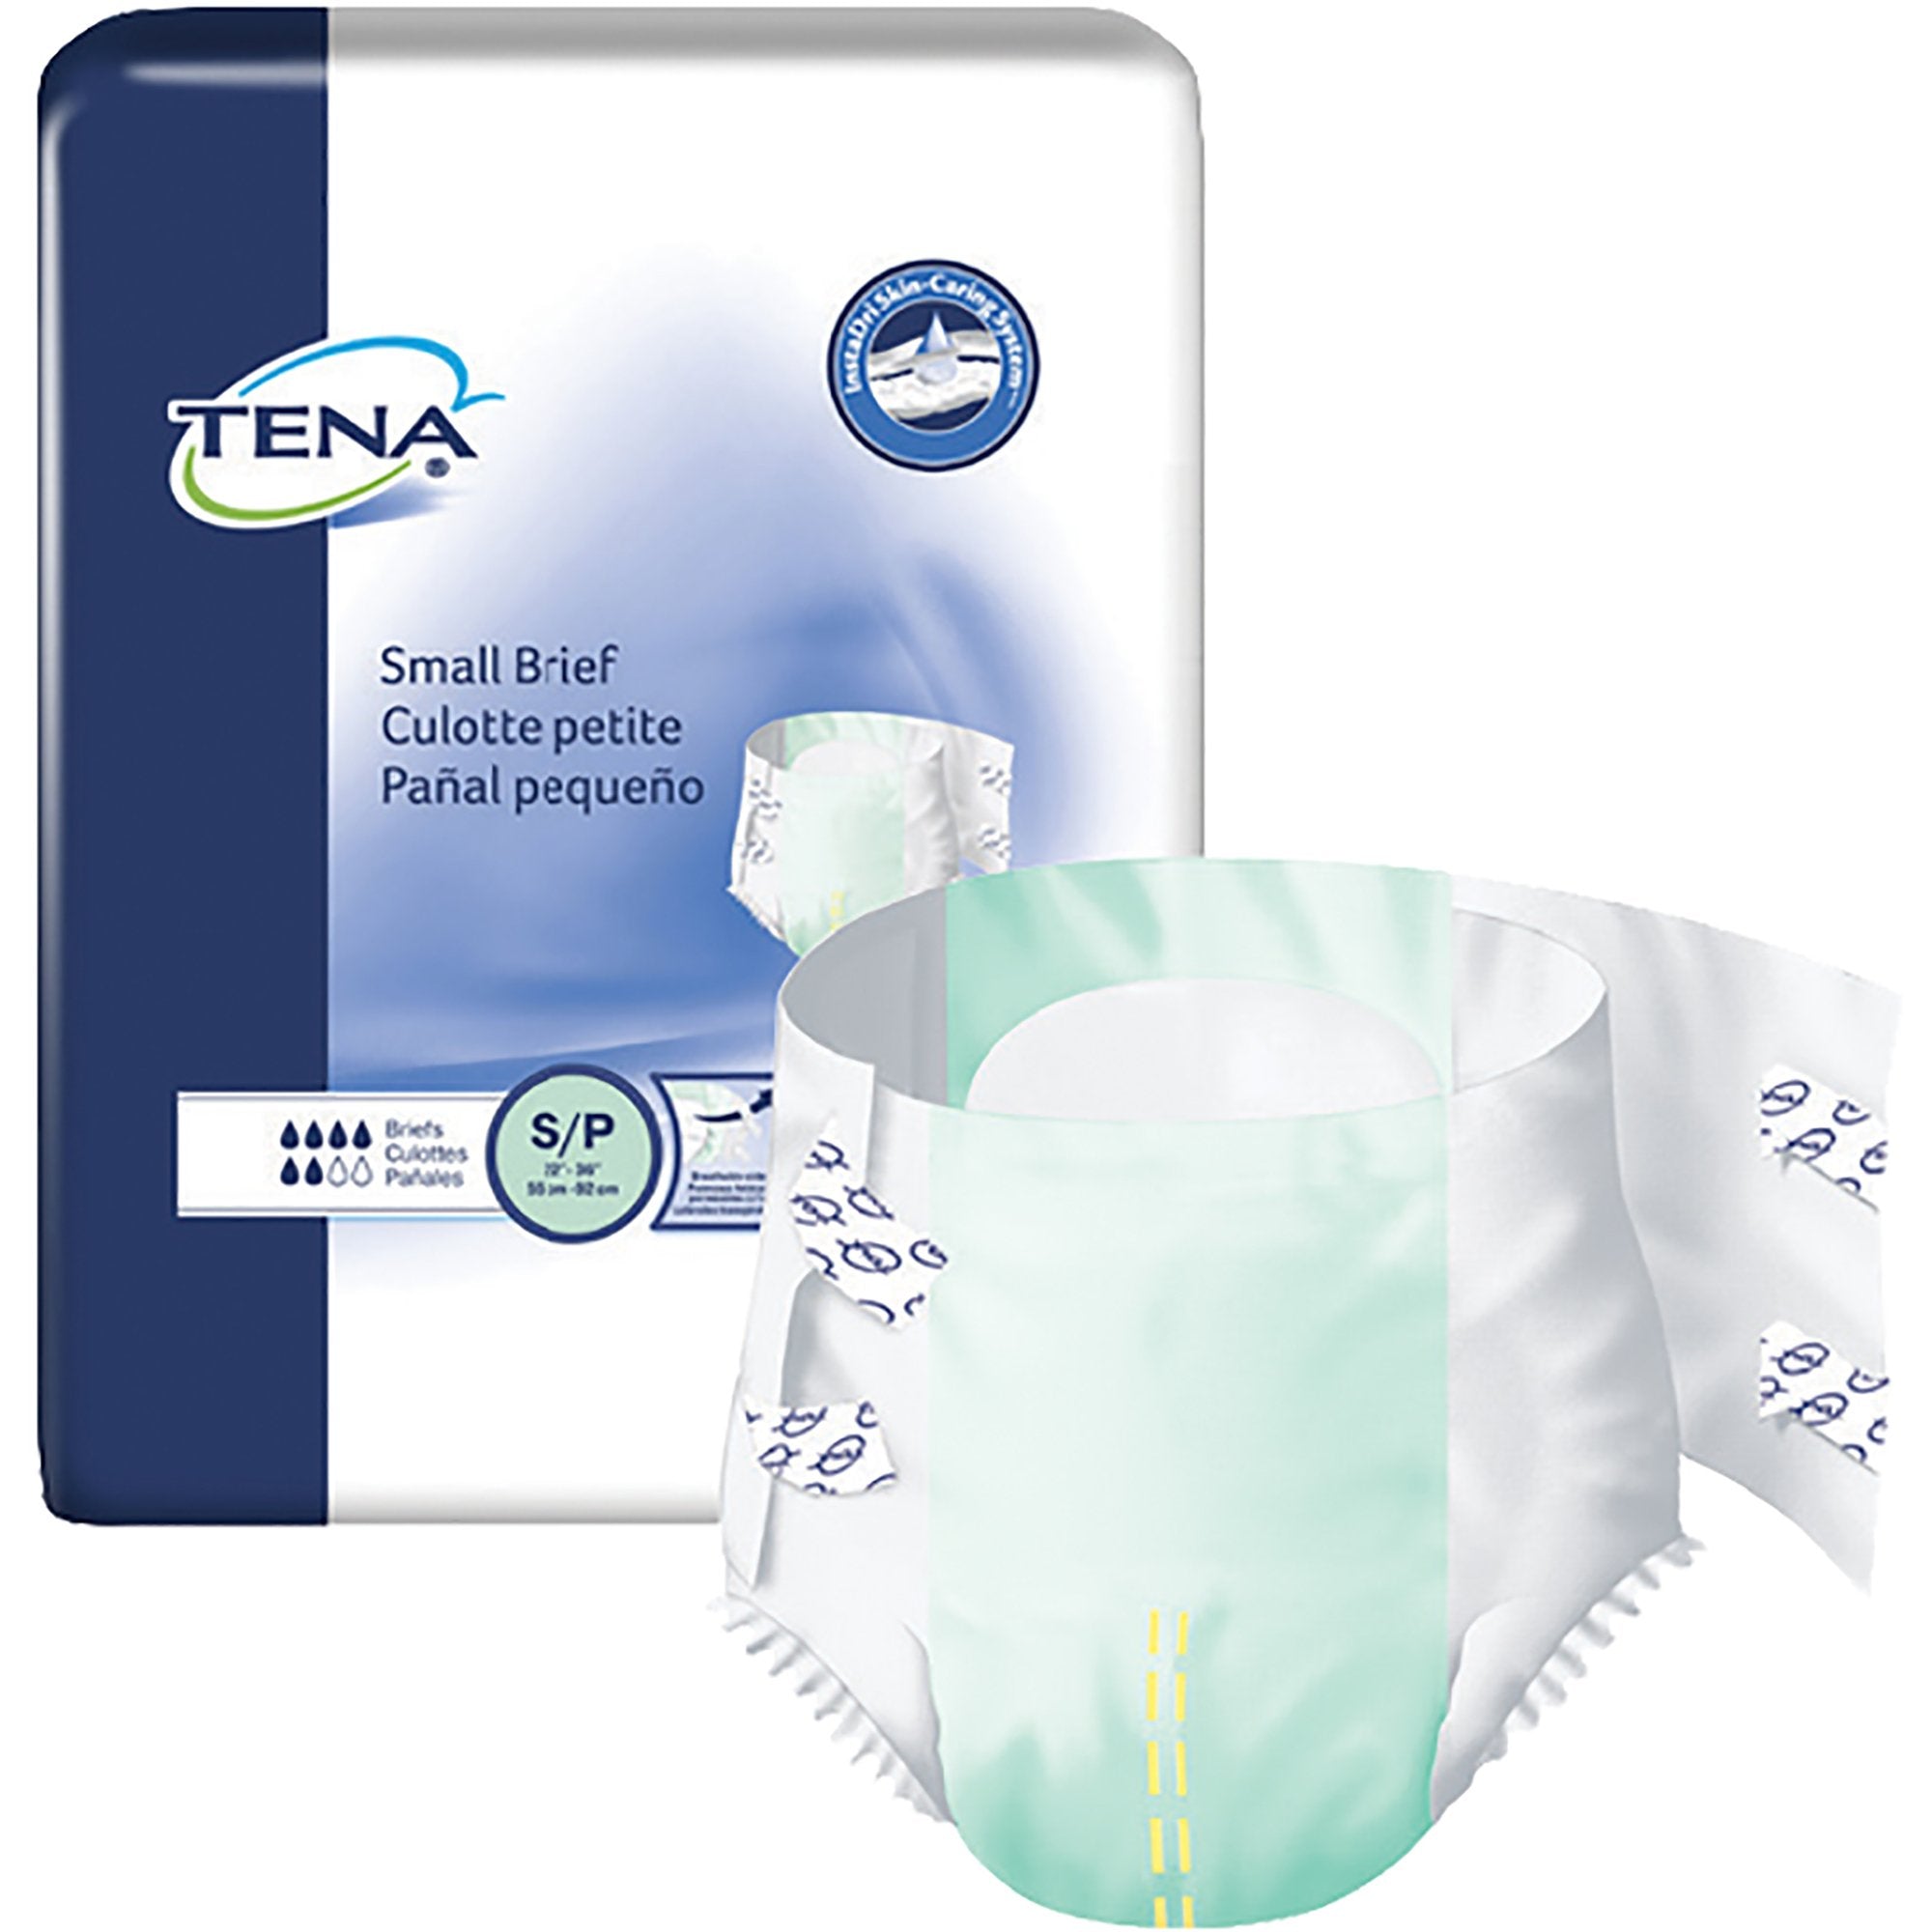 Unisex Adult Incontinence Brief TENA Small Brief Small Disposable Moderate Absorbency